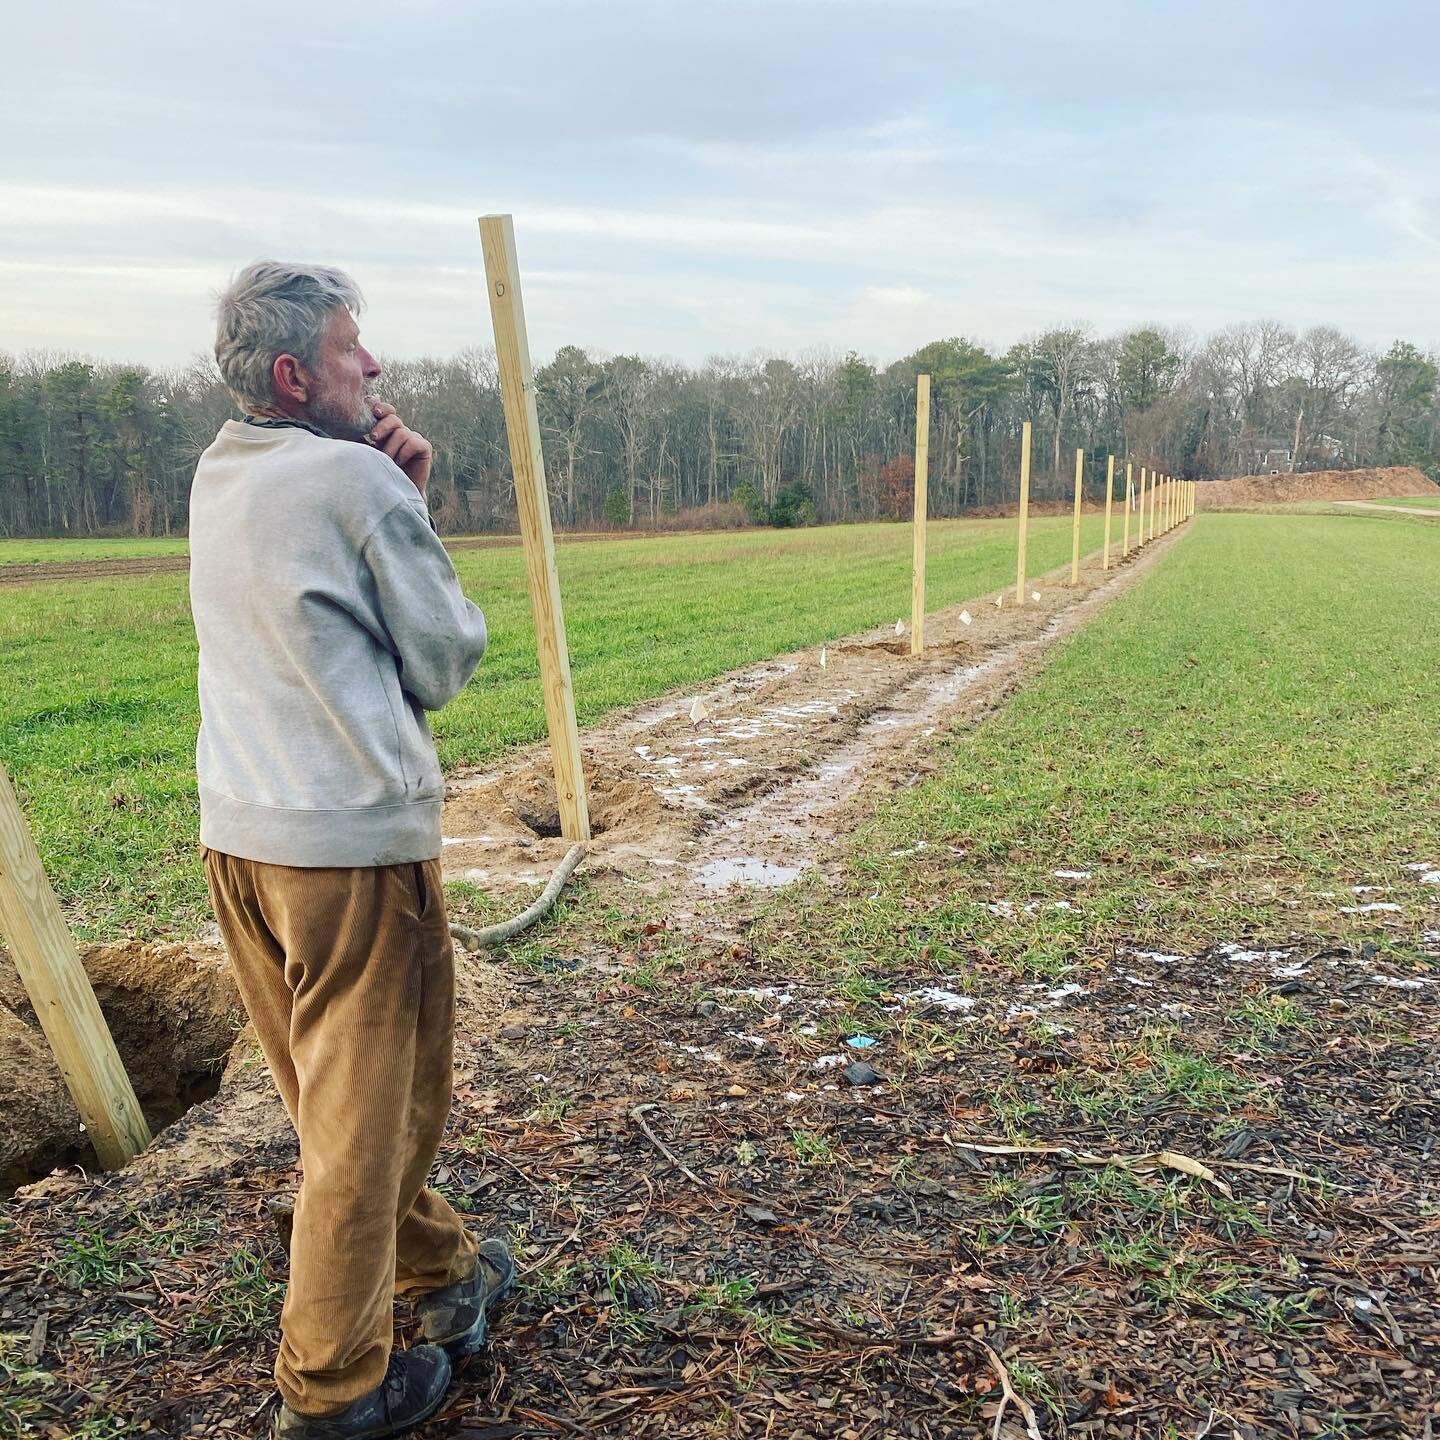 Give a gift to the community this season! Did you know Farming Falmouth is planning and is currently working on a community orchard here in Falmouth. Support your food system through a donation to Farming Falmouth. We are a 501c3 with big plans for t